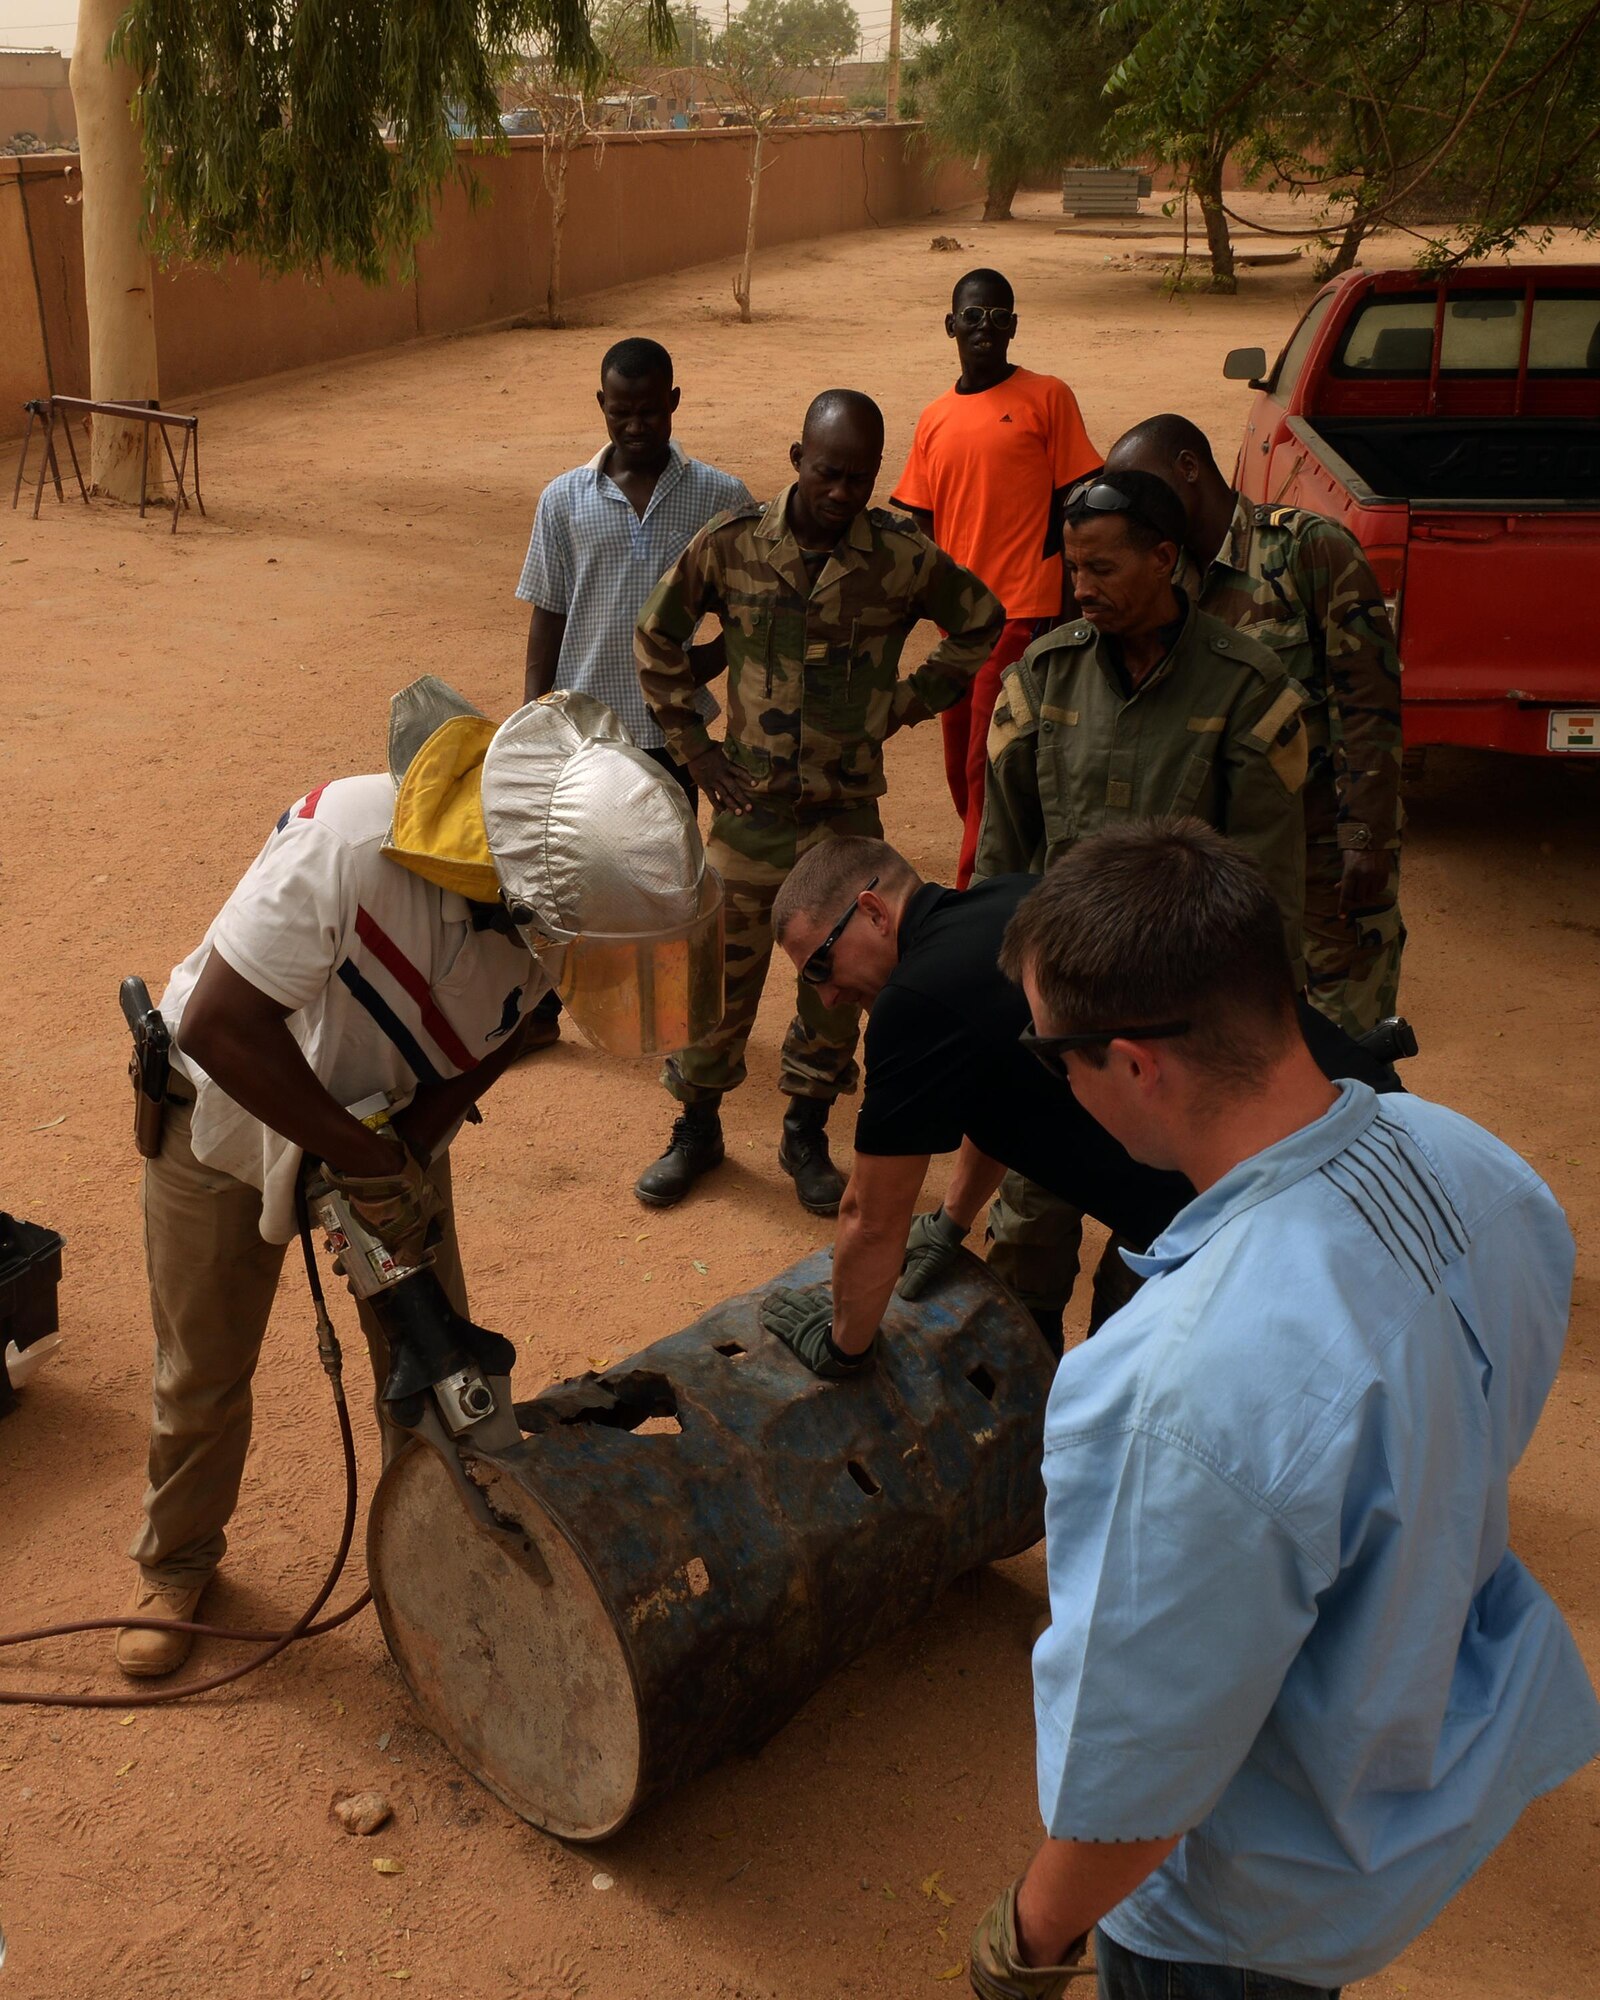 Members of the Forces Armées Nigeriennes watch as Senior Airman Micah Moody, 724th Expeditionary Air Base Squadron Fire Department driver operator, cuts through metal with a combination spreader tool in Agadez, Niger, May 16, 2017. The combination spreader tool is a hydraulic rescue tool, commonly referred to as the Jaws of Life, firefighters use to extricate a person trapped in an emergency situation. (U.S. Air Force photo by Senior Airman Jimmie D. Pike)